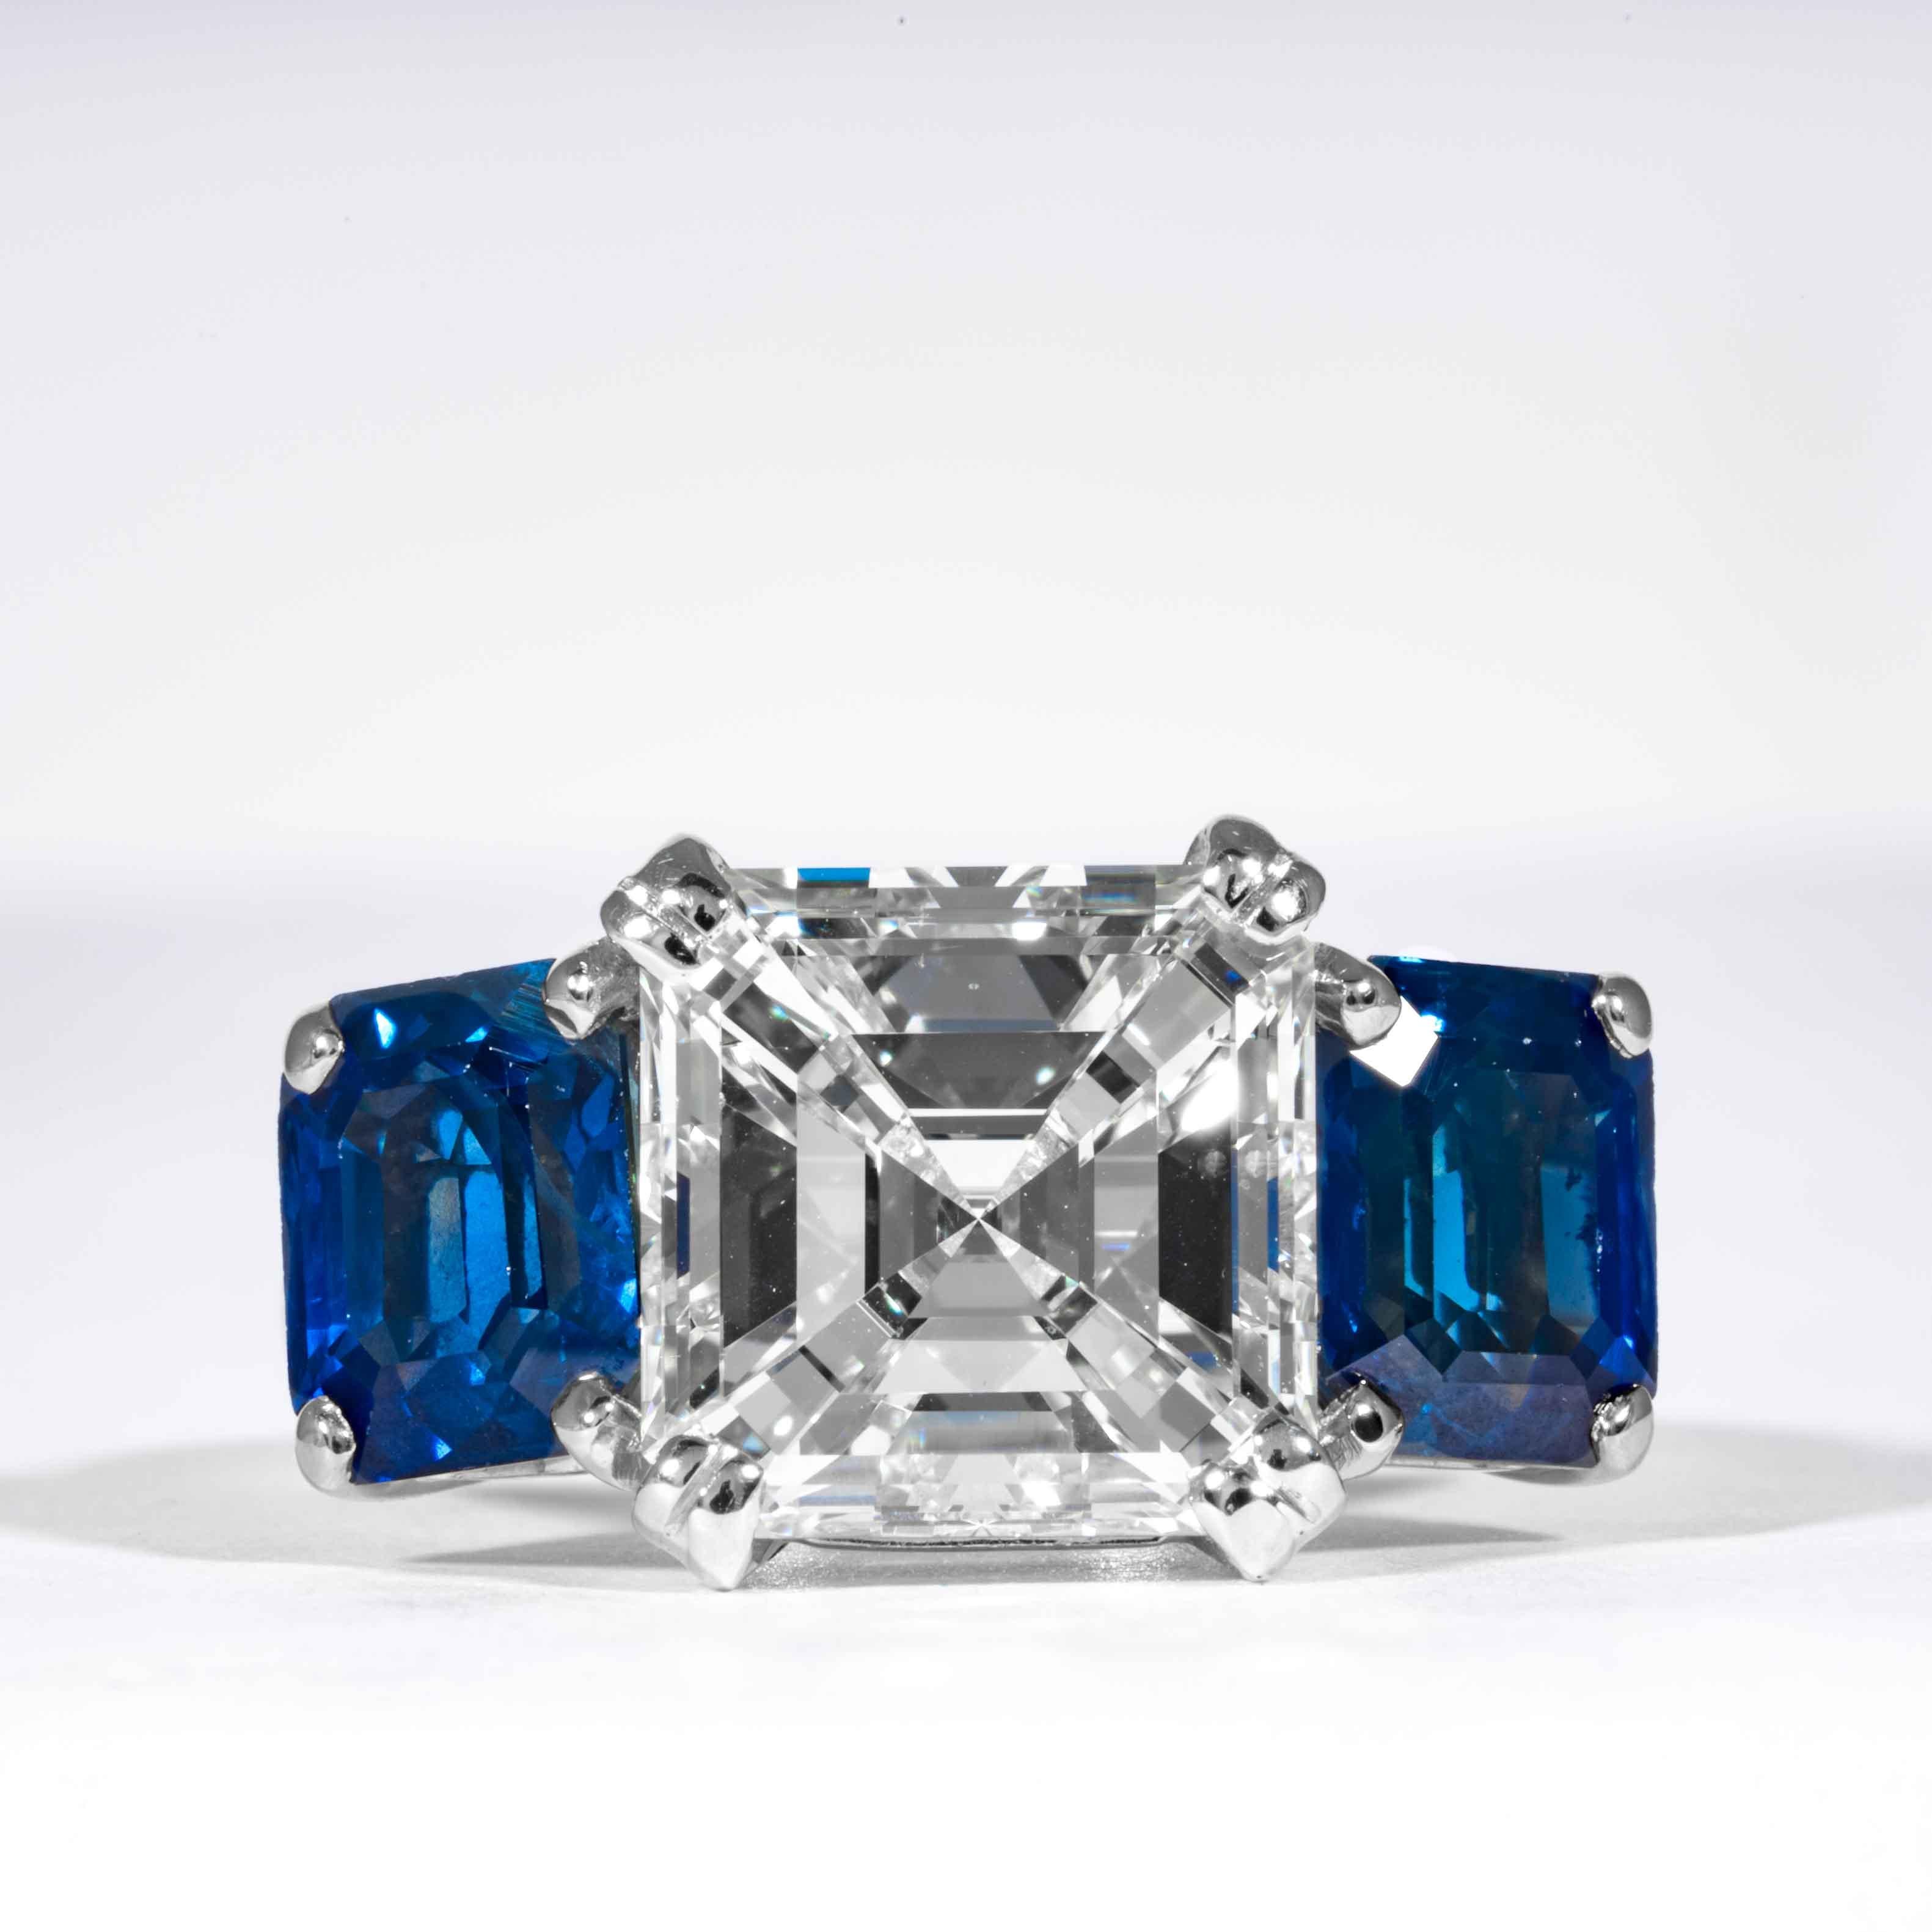 This classic square emerald cut 3-stone diamond is offered by Shreve, Crump & Low. This 5.01 carat GIA Certified I VS2 square emerald cut diamond measuring 9.83 x 9.83 x 6.46 mm is custom set in a handcrafted Shreve, Crump & Low platinum and 18kt